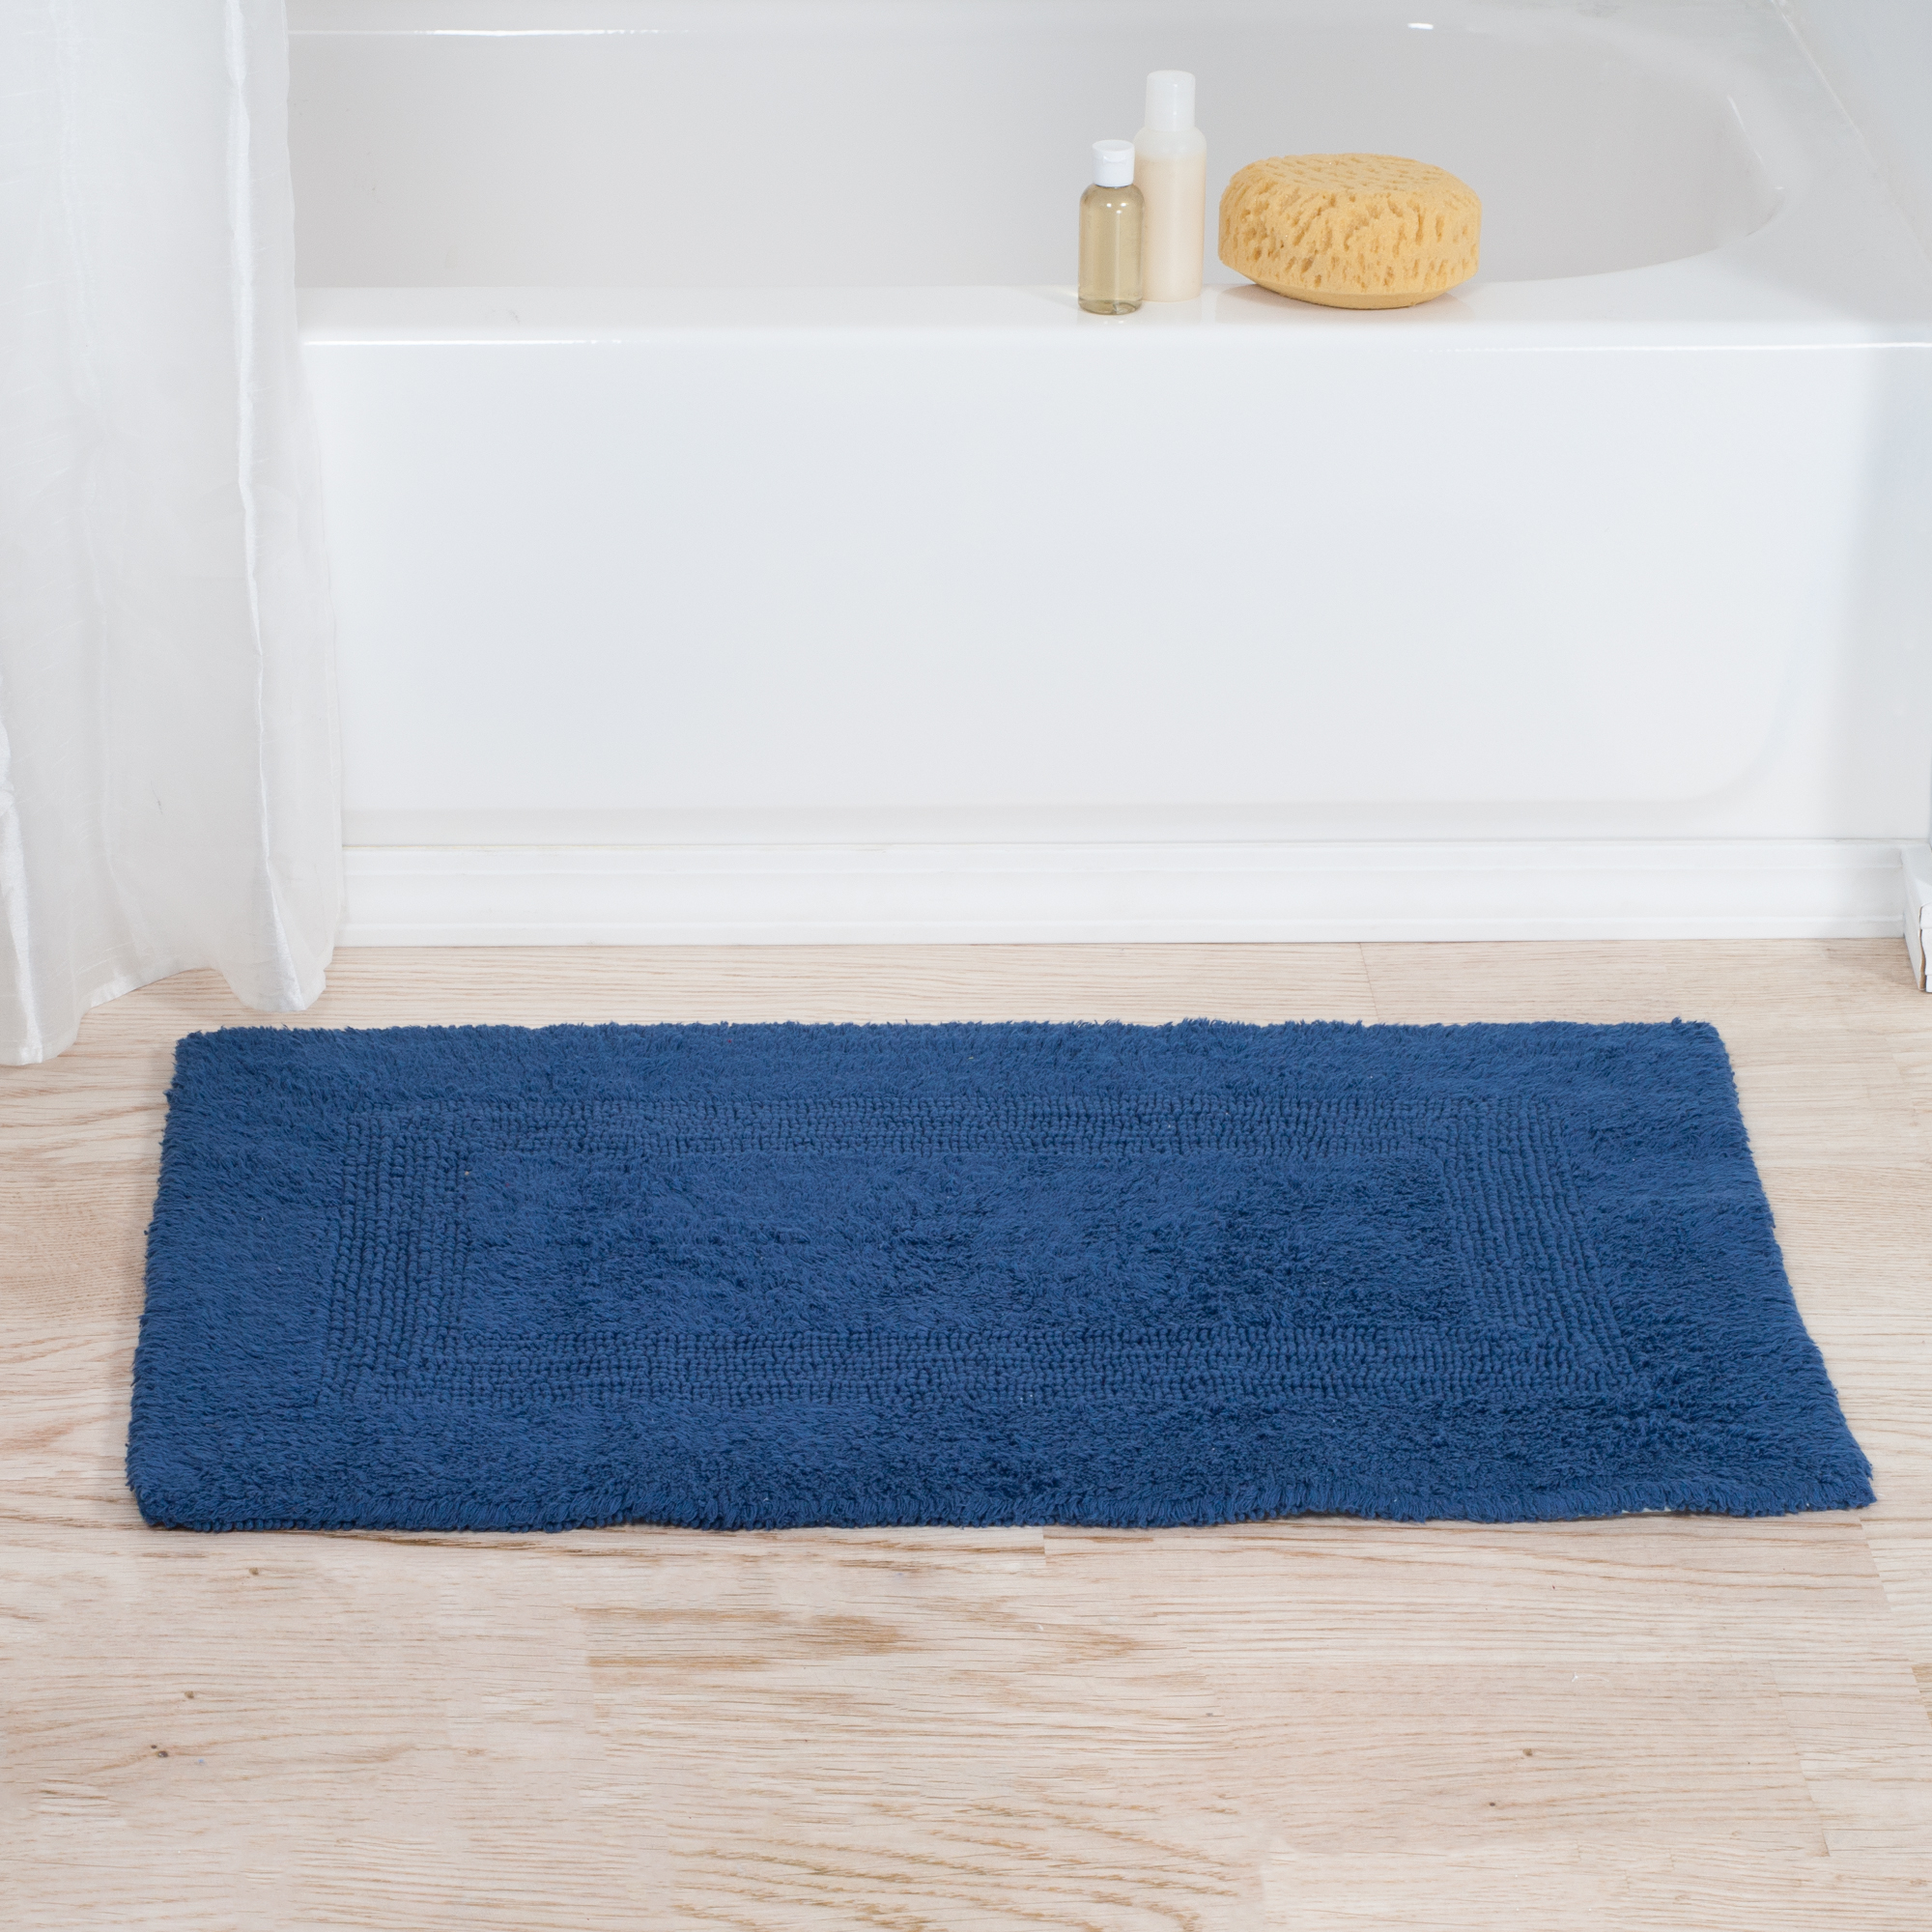 Cotton Reversible Bath Mat- 100 Percent Cotton, Soft And Absorbent Hand Tufted Bath Rug 24 X 40 Inch Black